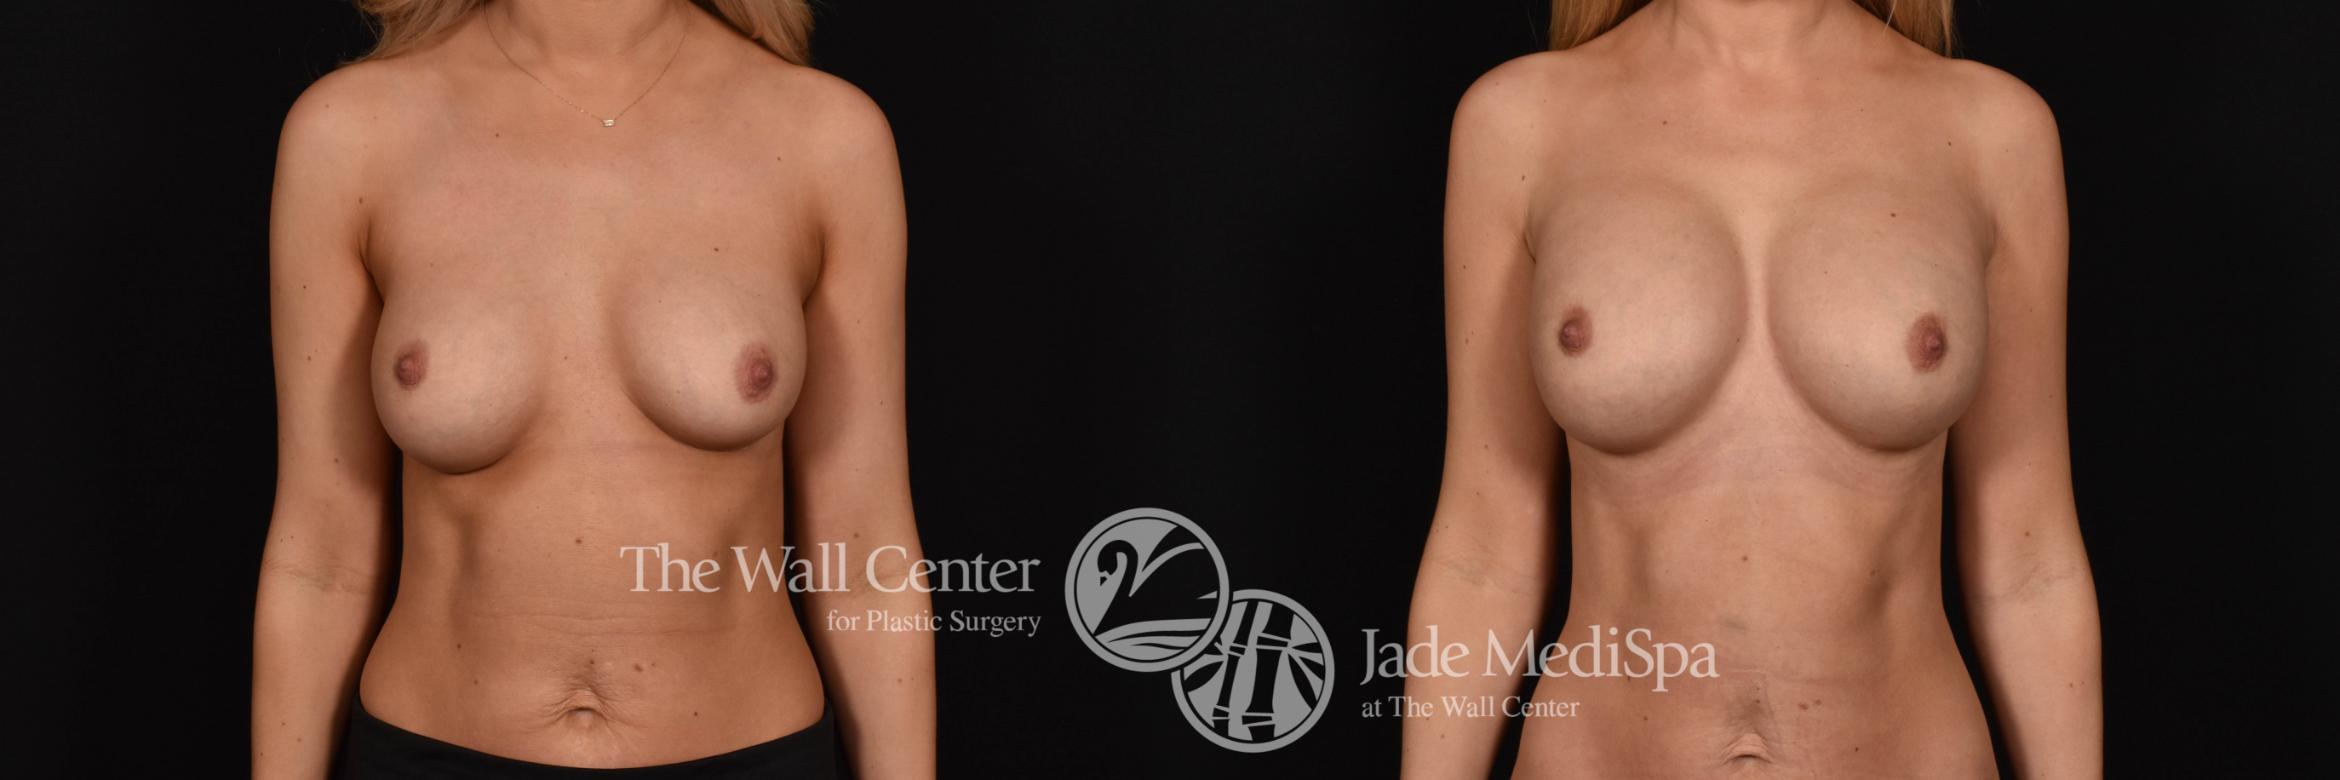 Breast Implant Exchange Front Photo, Shreveport, Louisiana, The Wall Center for Plastic Surgery, Case 861